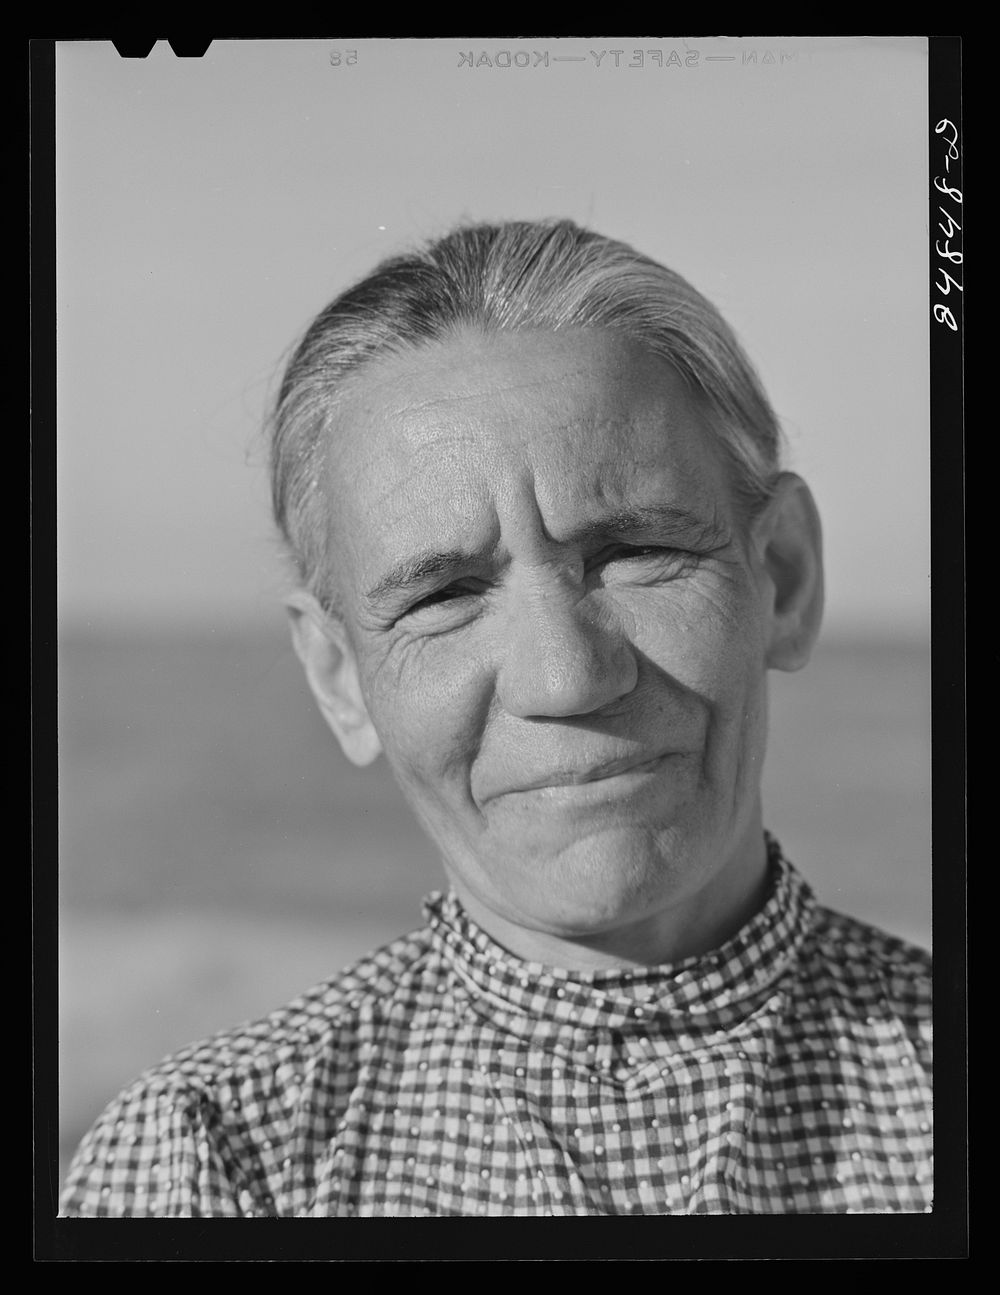 Migratory worker's wife. Robstown camp, Texas. Sourced from the Library of Congress.